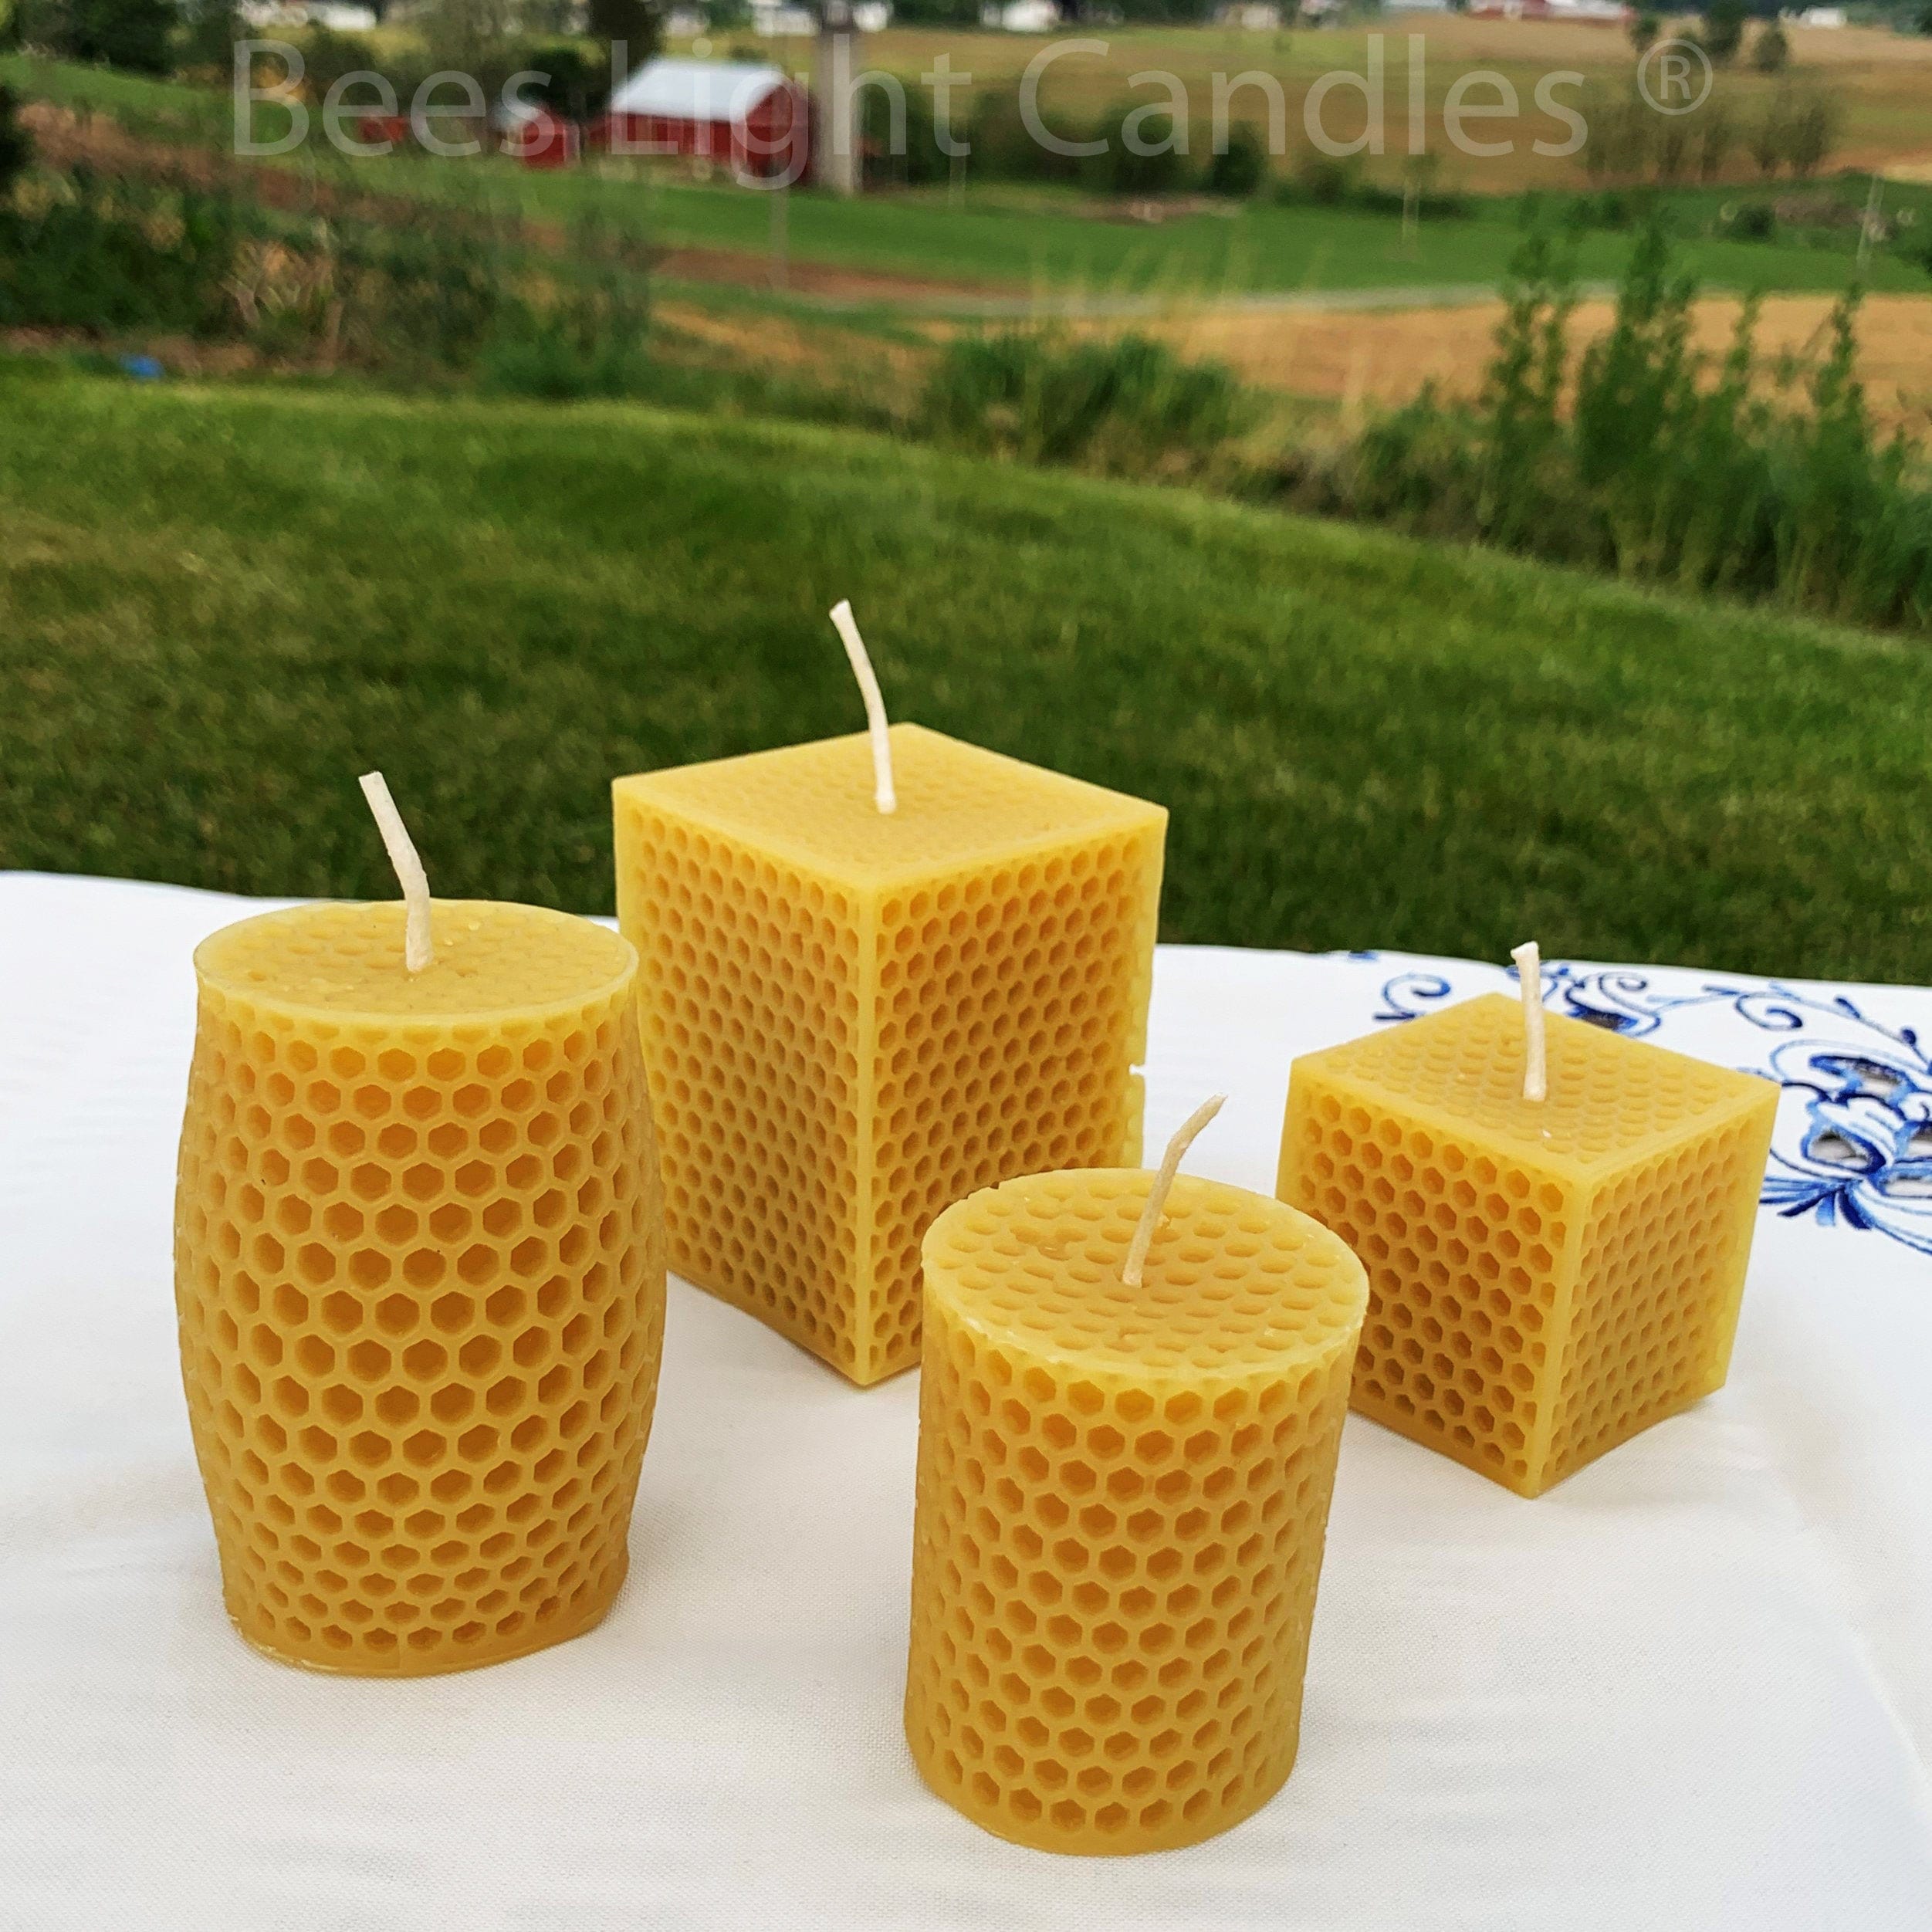 Handcrafted Honeycomb Natural Beeswax Candles 